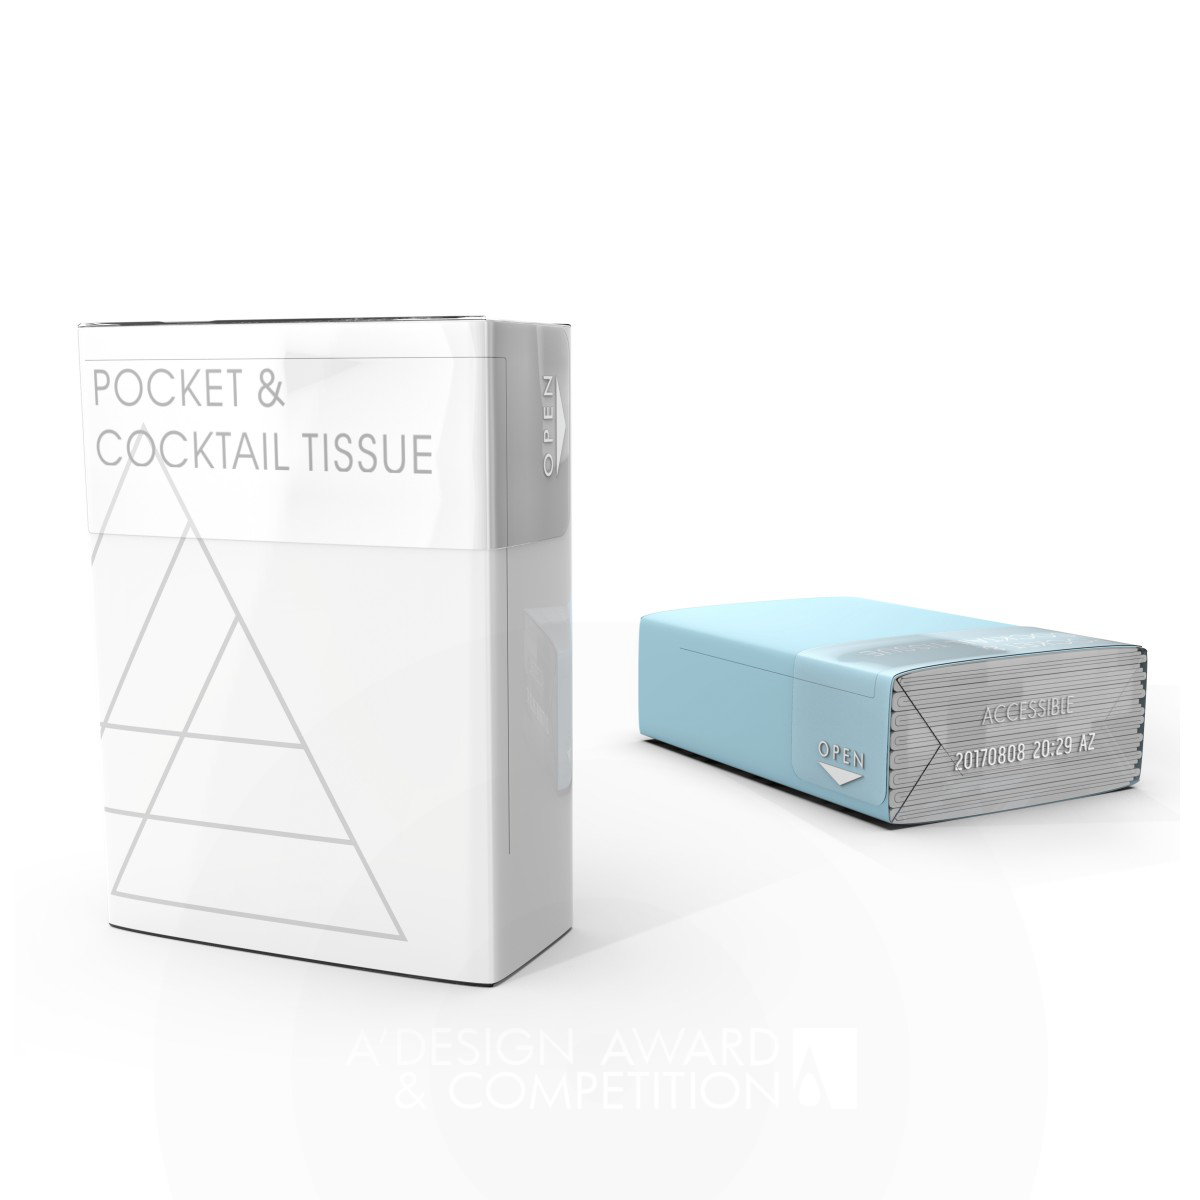 Creator C-400 Barrier-Free Pocket & Cocktail Tissue Pa by Canliang Chen